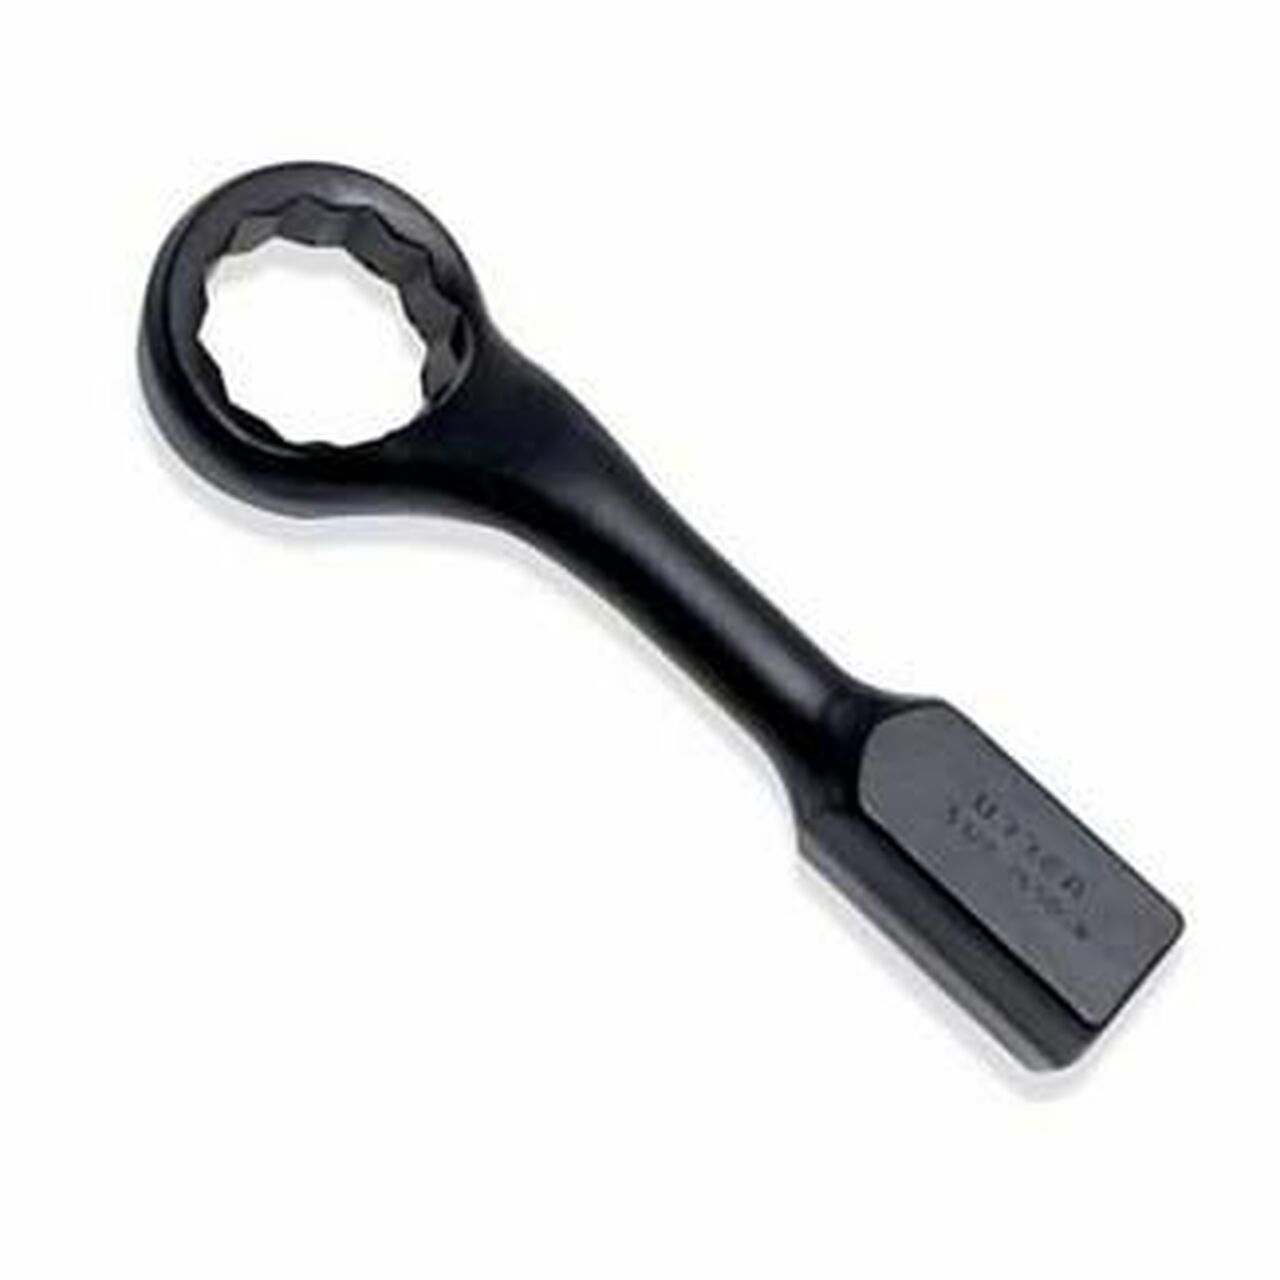 1-5/8 IN 12-PT OFFSET STRIKING
WRENCH